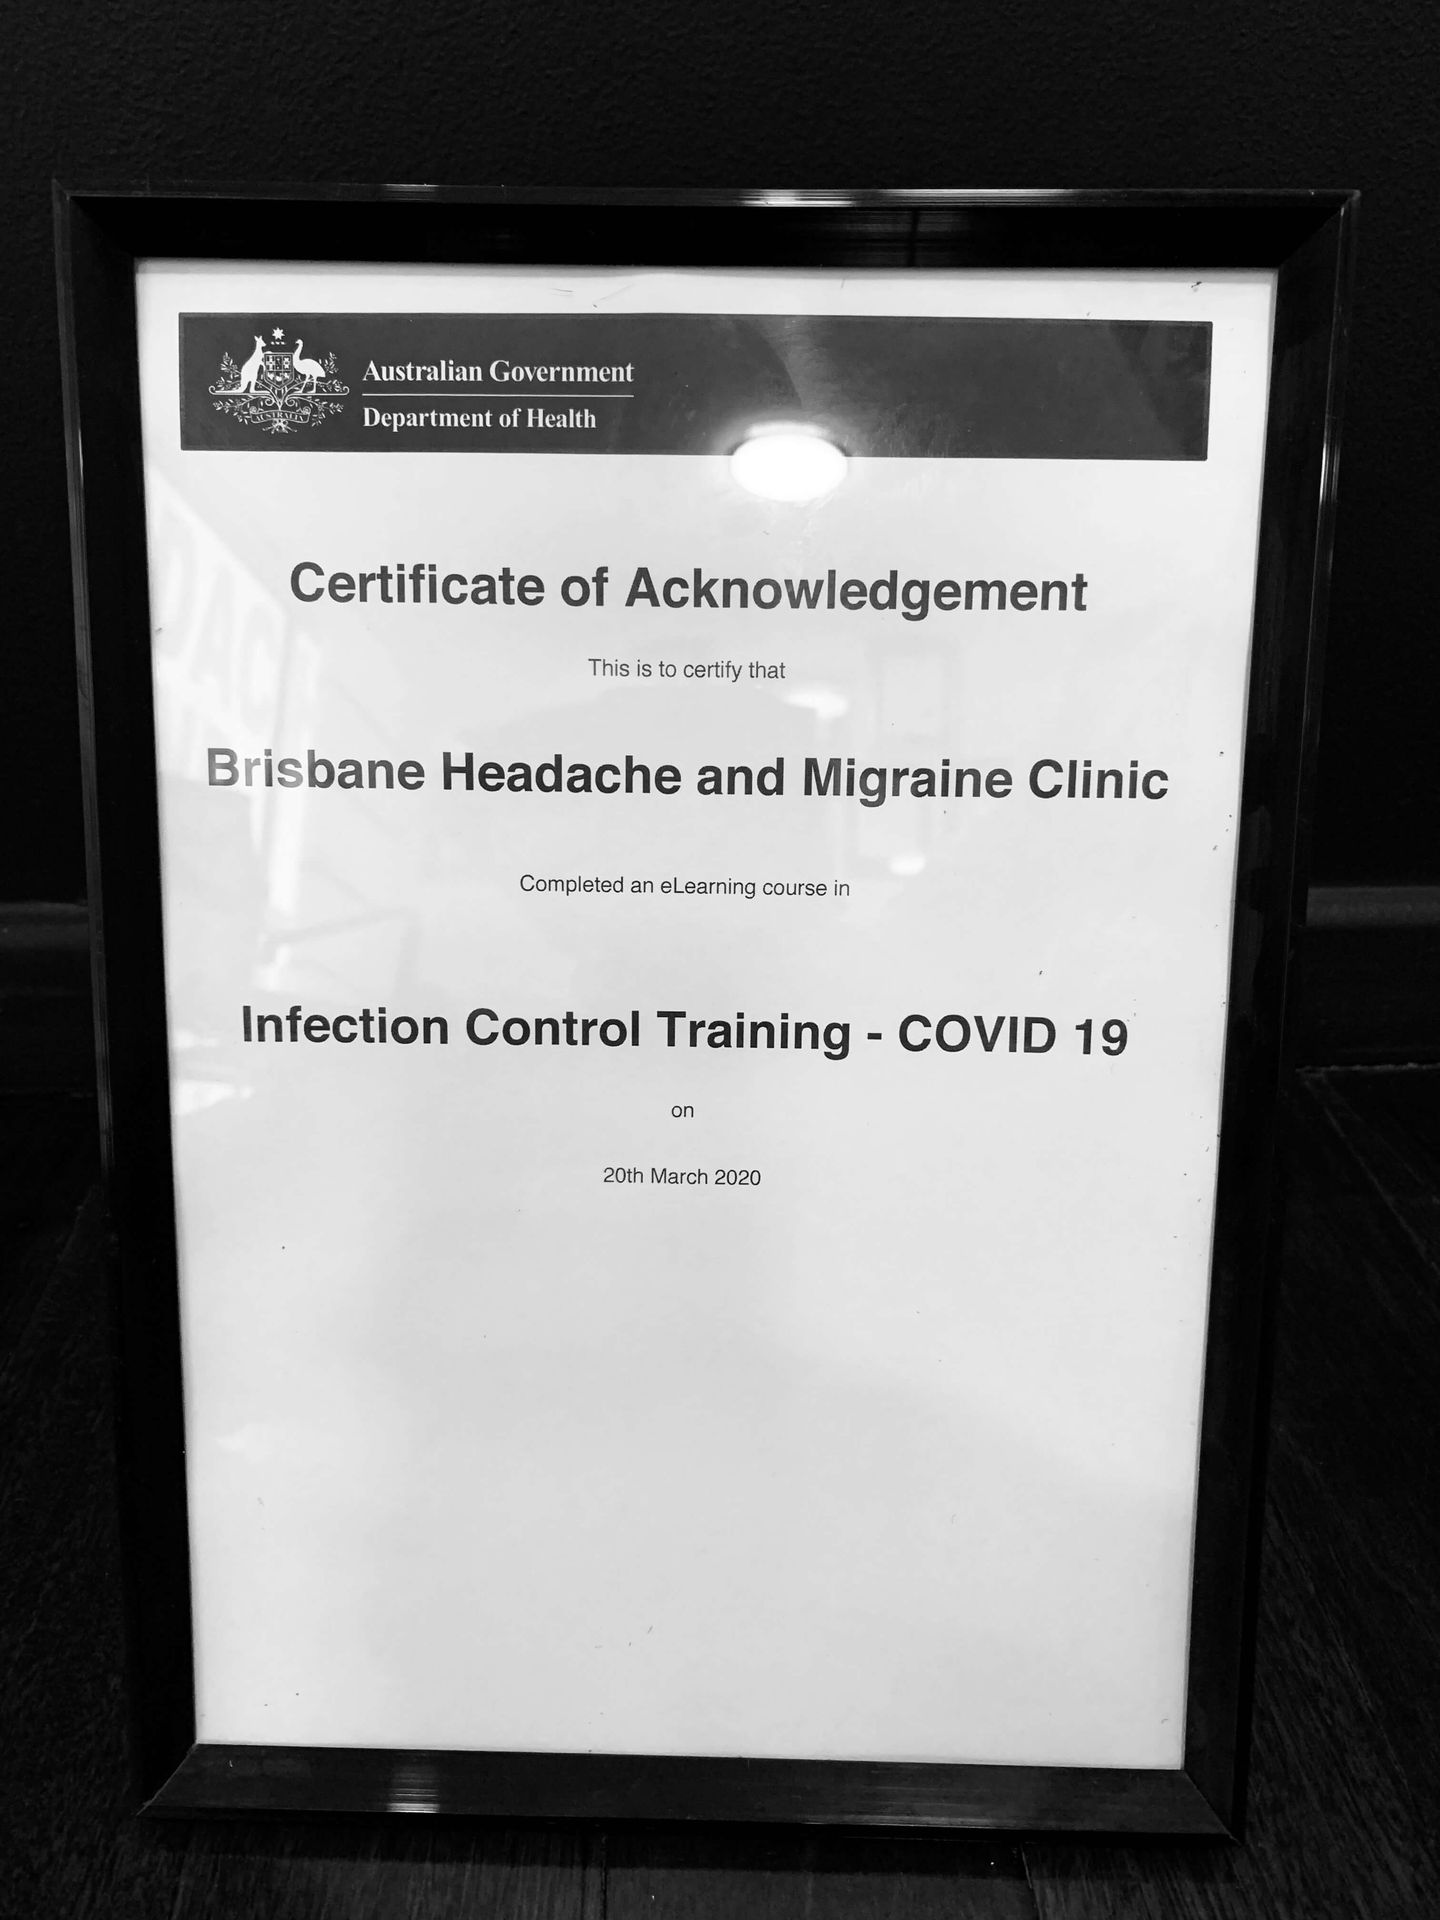 Infection Control Training for COVID-19 Certificate